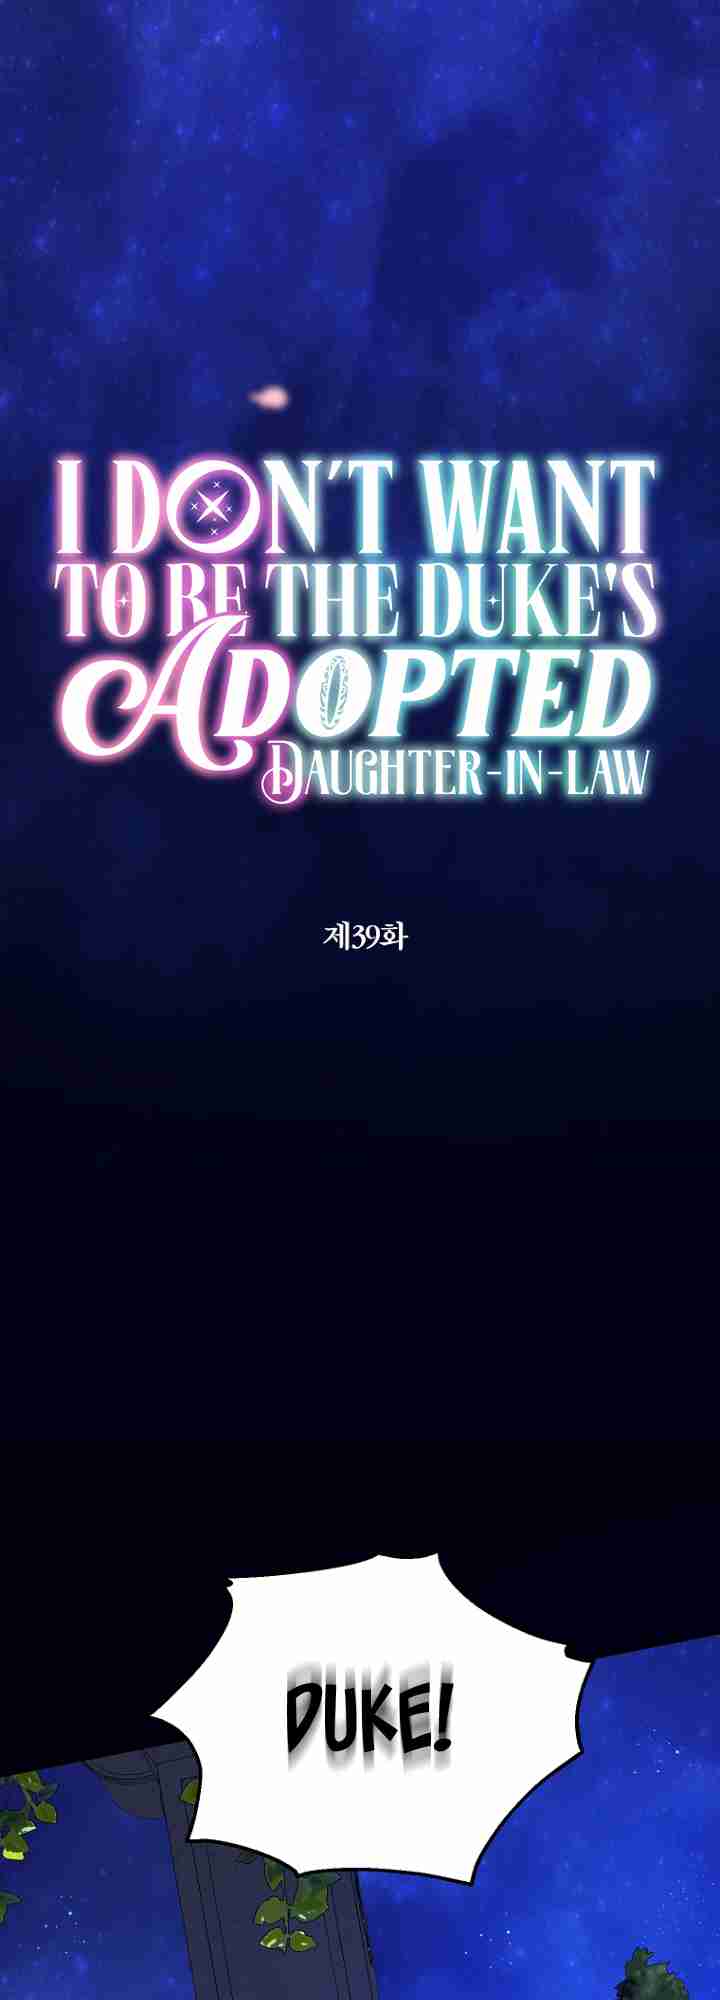 Adopted Daughter-in-Law Is Preparing to Be Abandoned 39